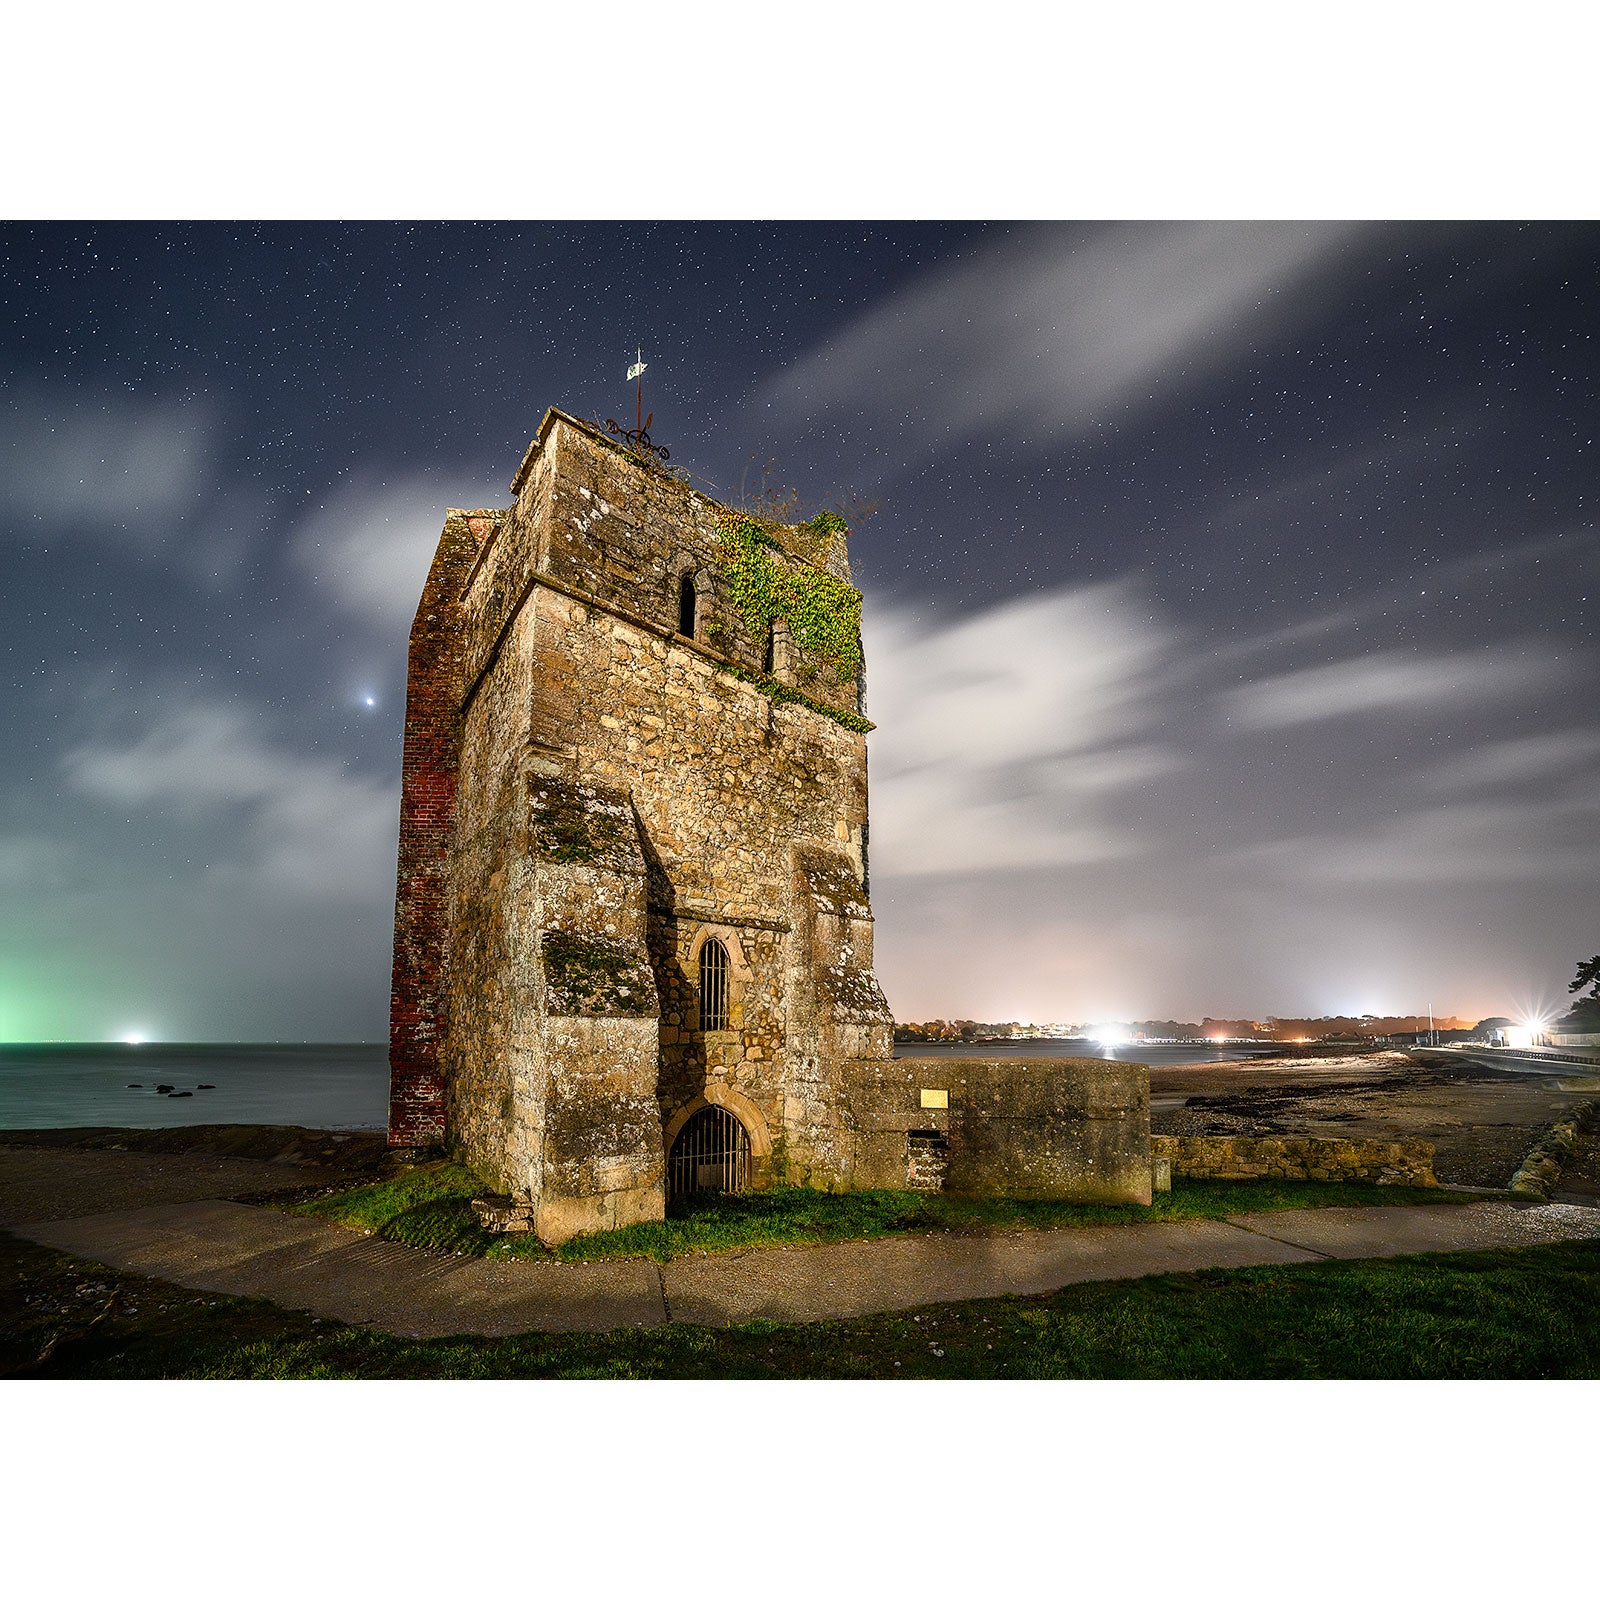 An ancient tower stands against a starry night sky with city lights in the distance and a hint of an aurora on the horizon, evoking tales of wights in folklore captured by Available Light Photography's St. Helen's Old Church.